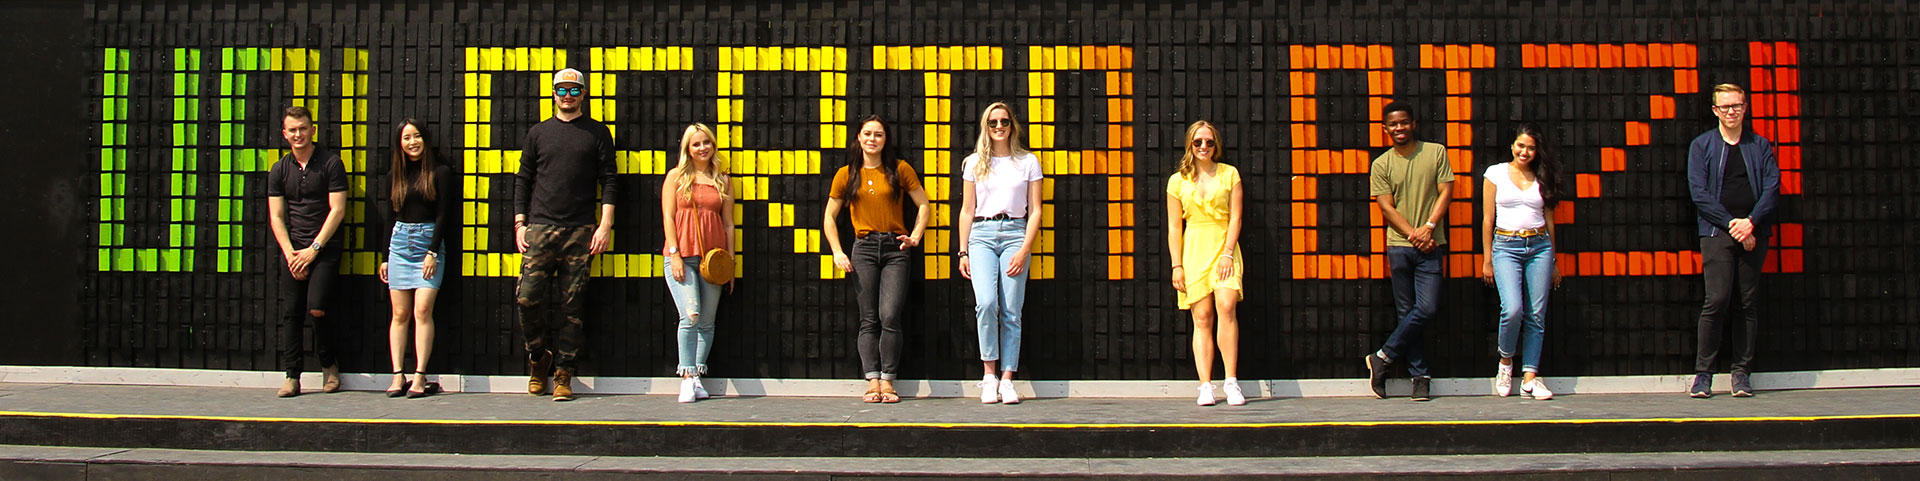 Business Students in front of Happy Wall